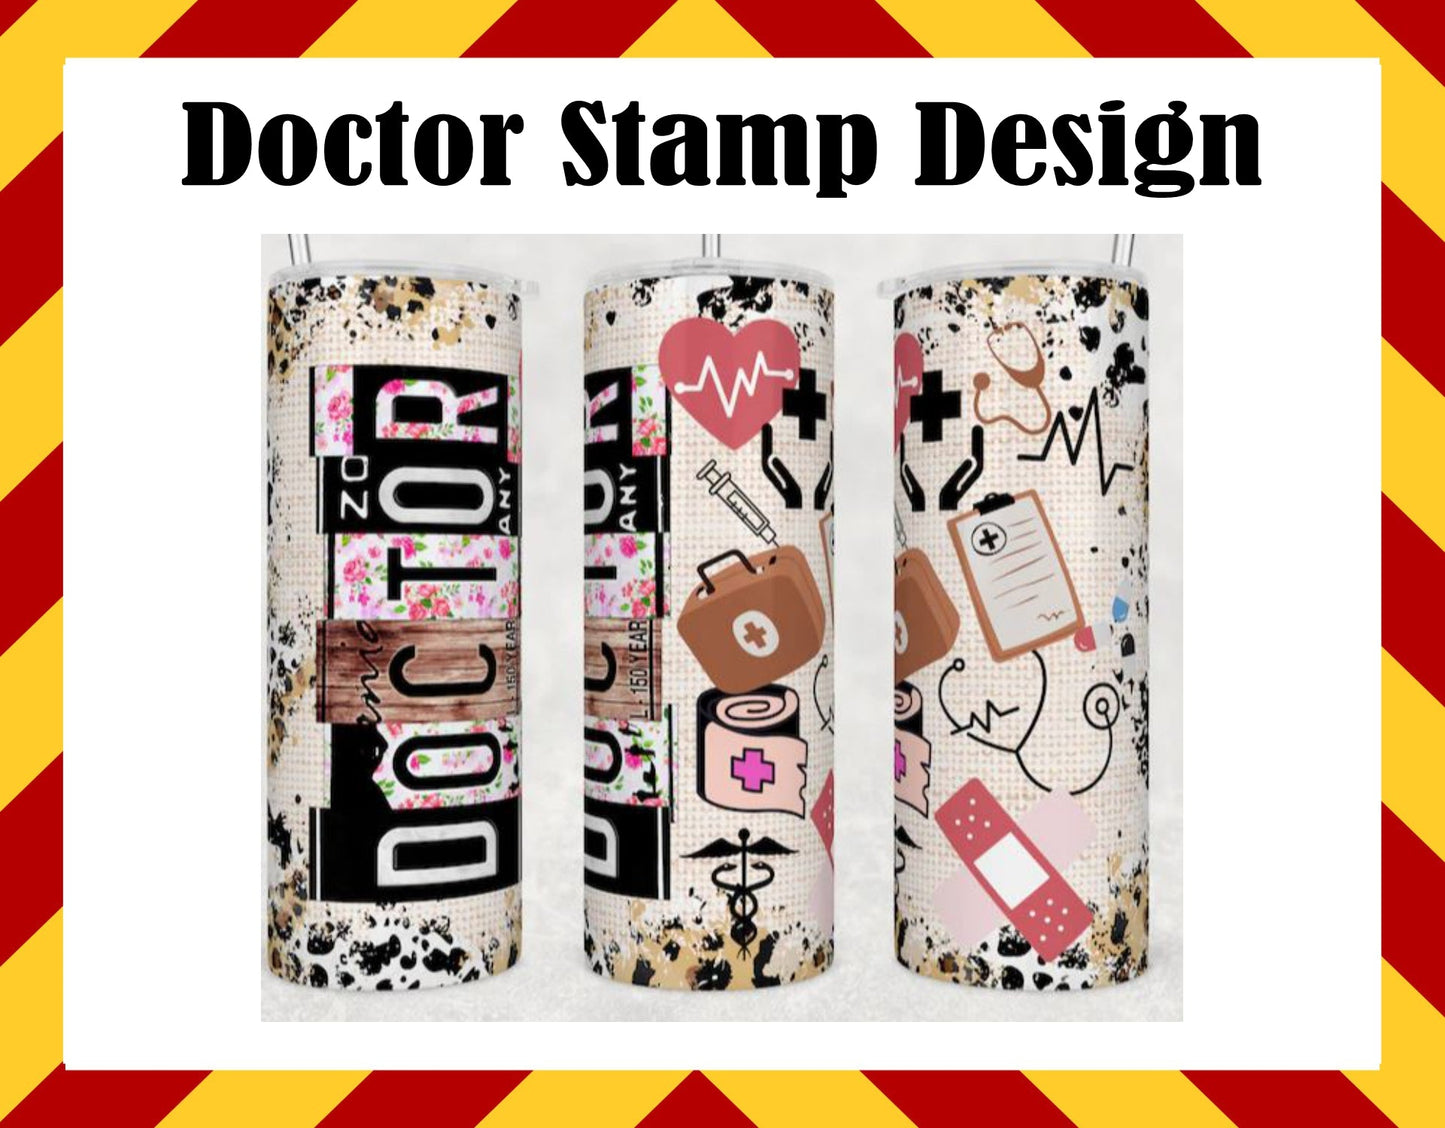 Stainless Steel Cup - Doctor Stamp Design